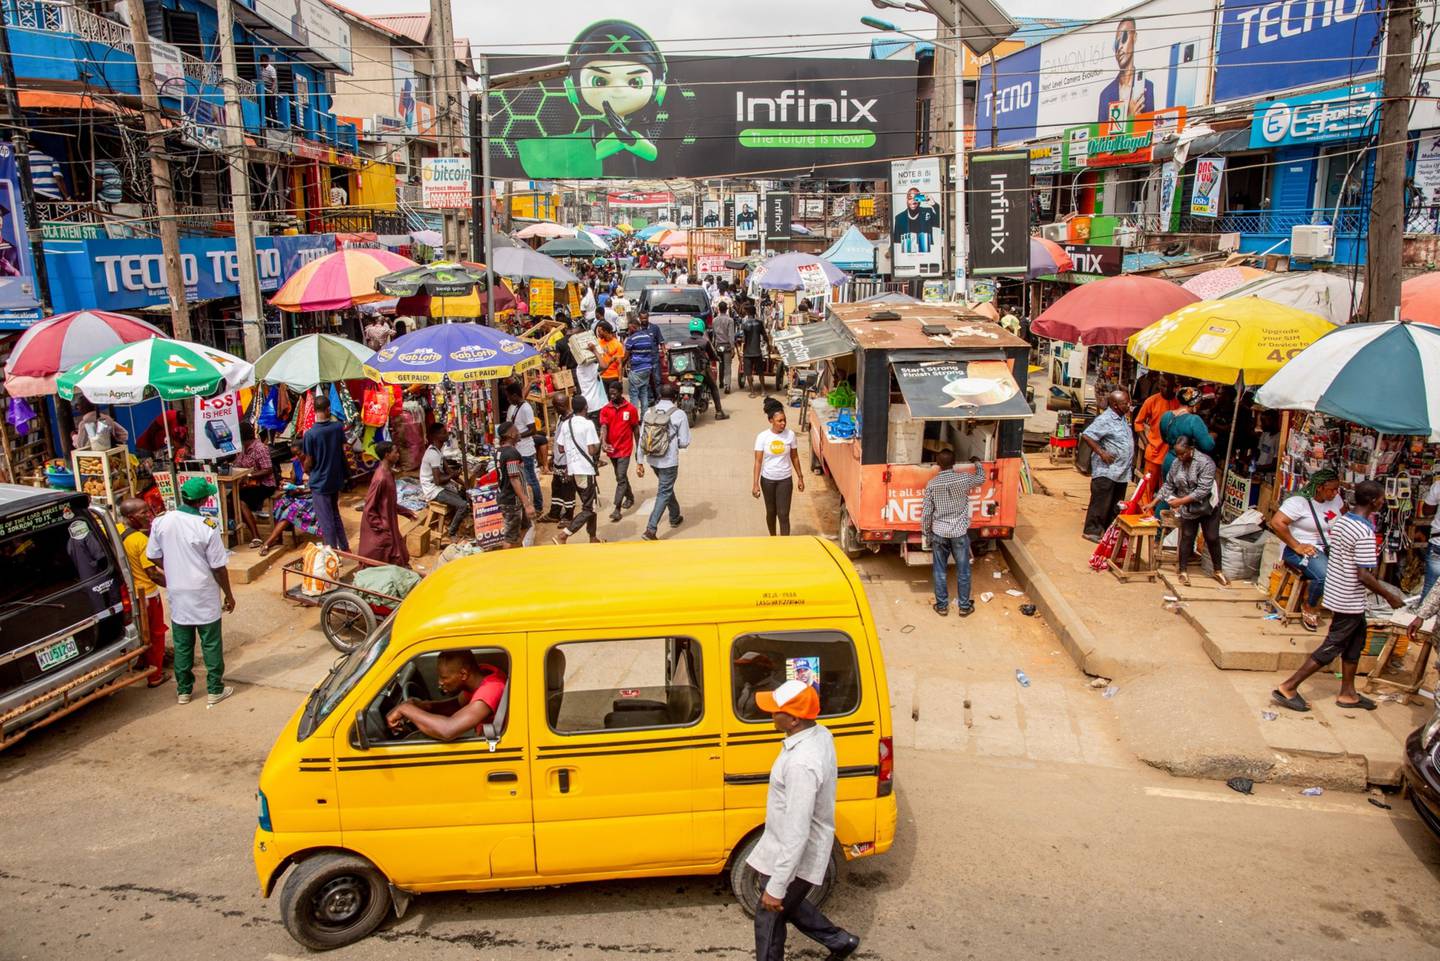 A taxi van drives past the entrance to the Ikeja computer village market in Lagos, Nigeria, on Monday, March 29, 2021.